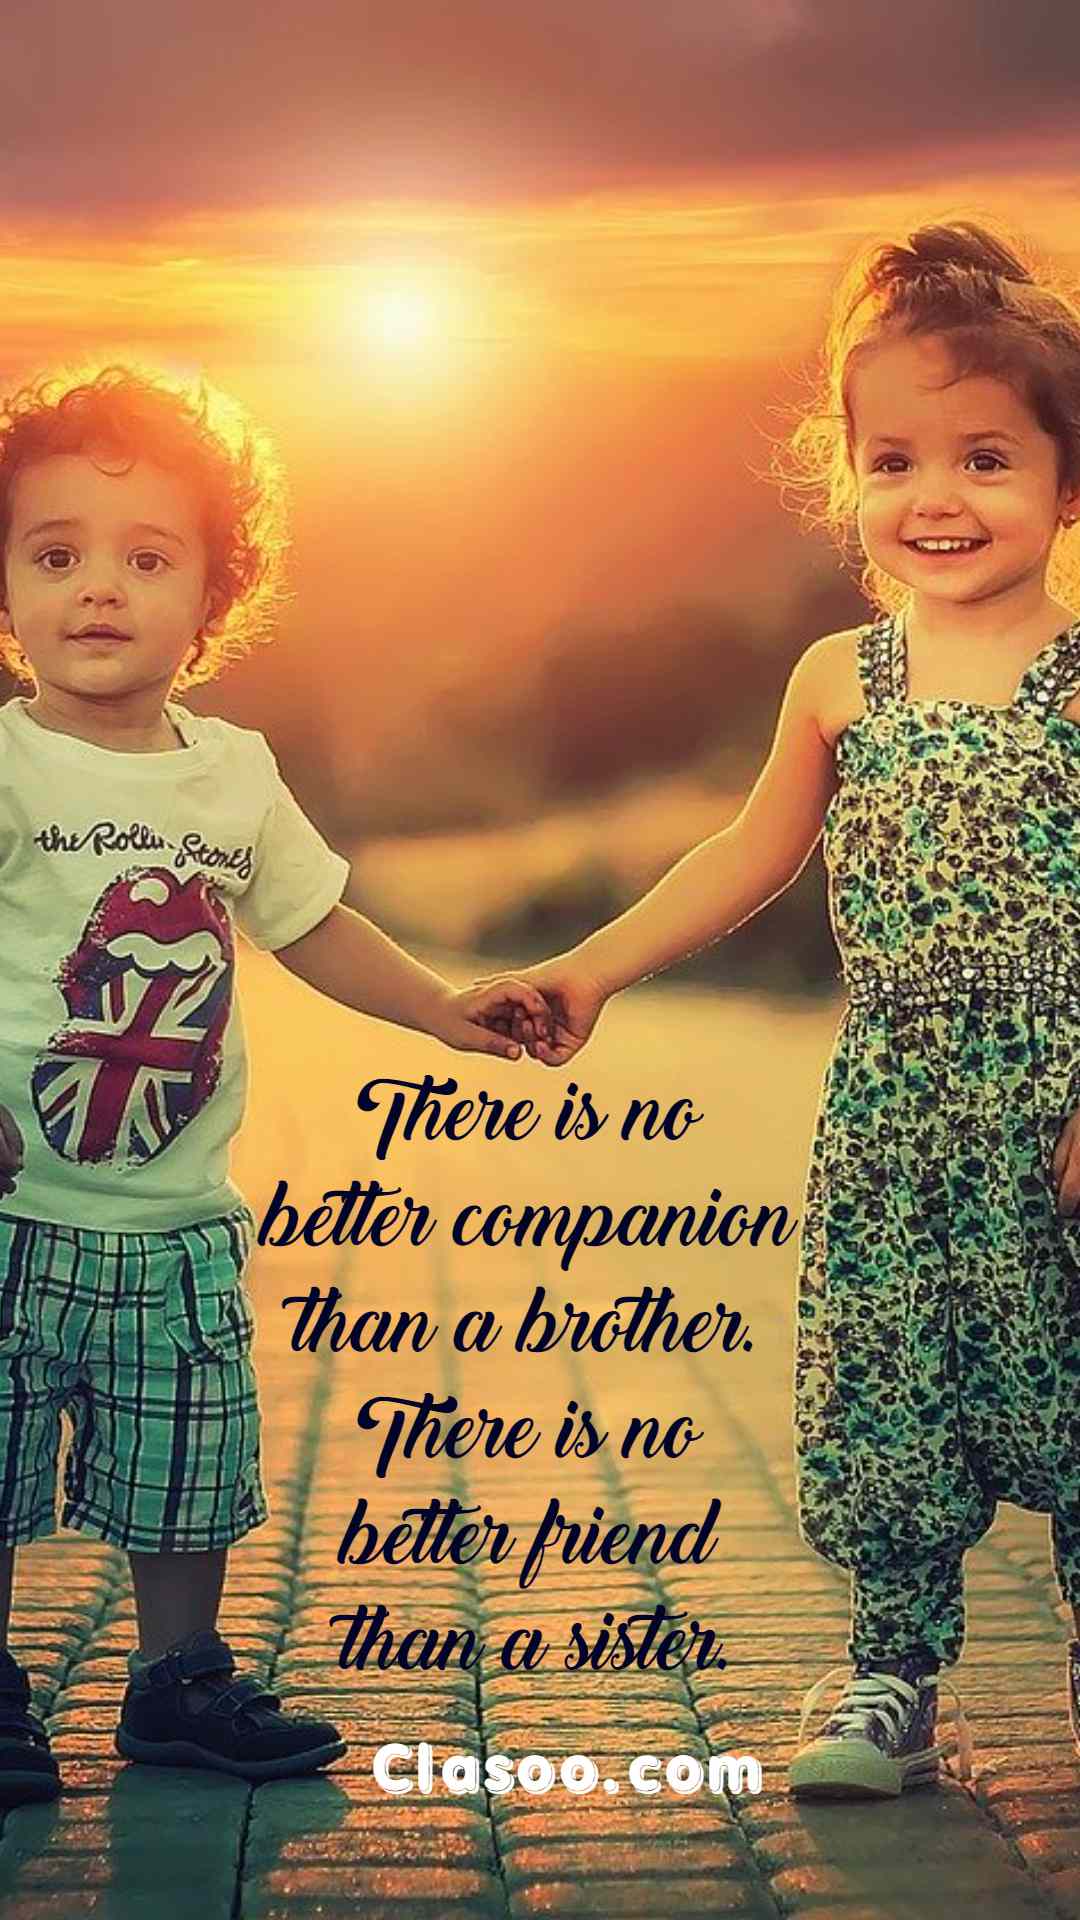 Brother and Sister Whatsapp Status Image 1